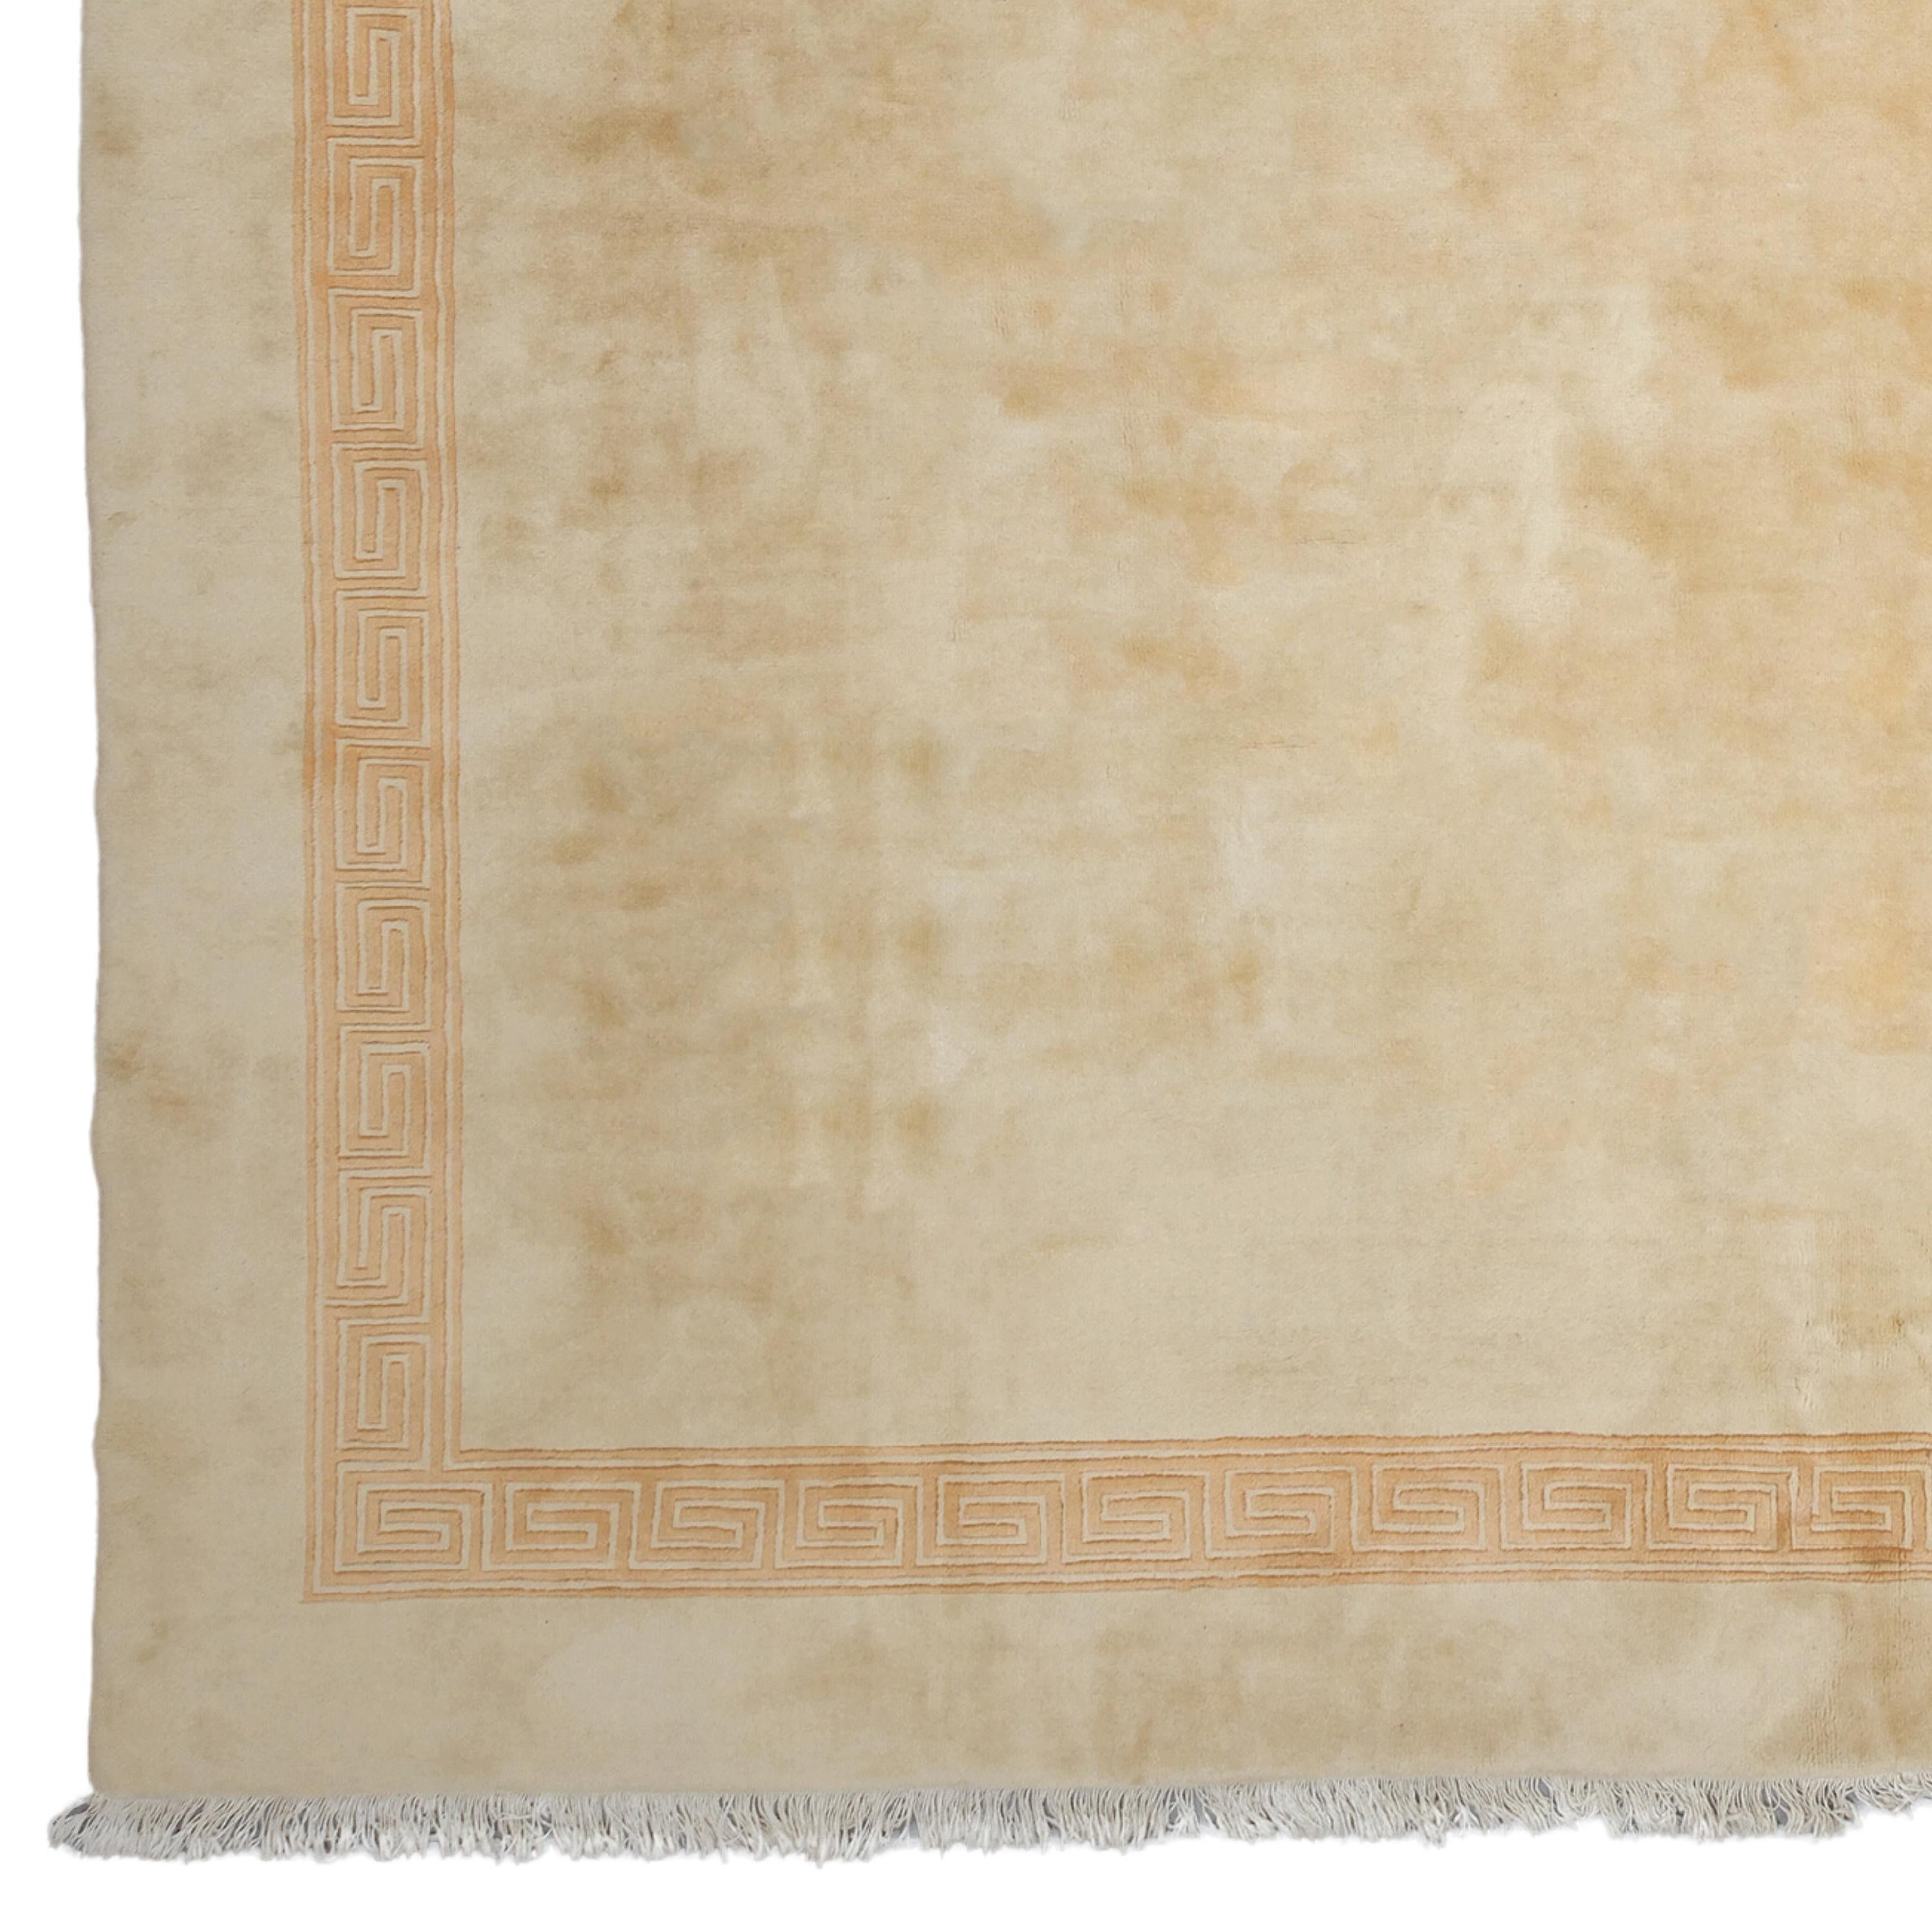 A Work of Art Beyond Time This rare piece is an antique Chinese carpet from the 19th century. It adds nobility to any space with its rich history and sophisticated design. Its silky texture and pale golden tones reflect timeless